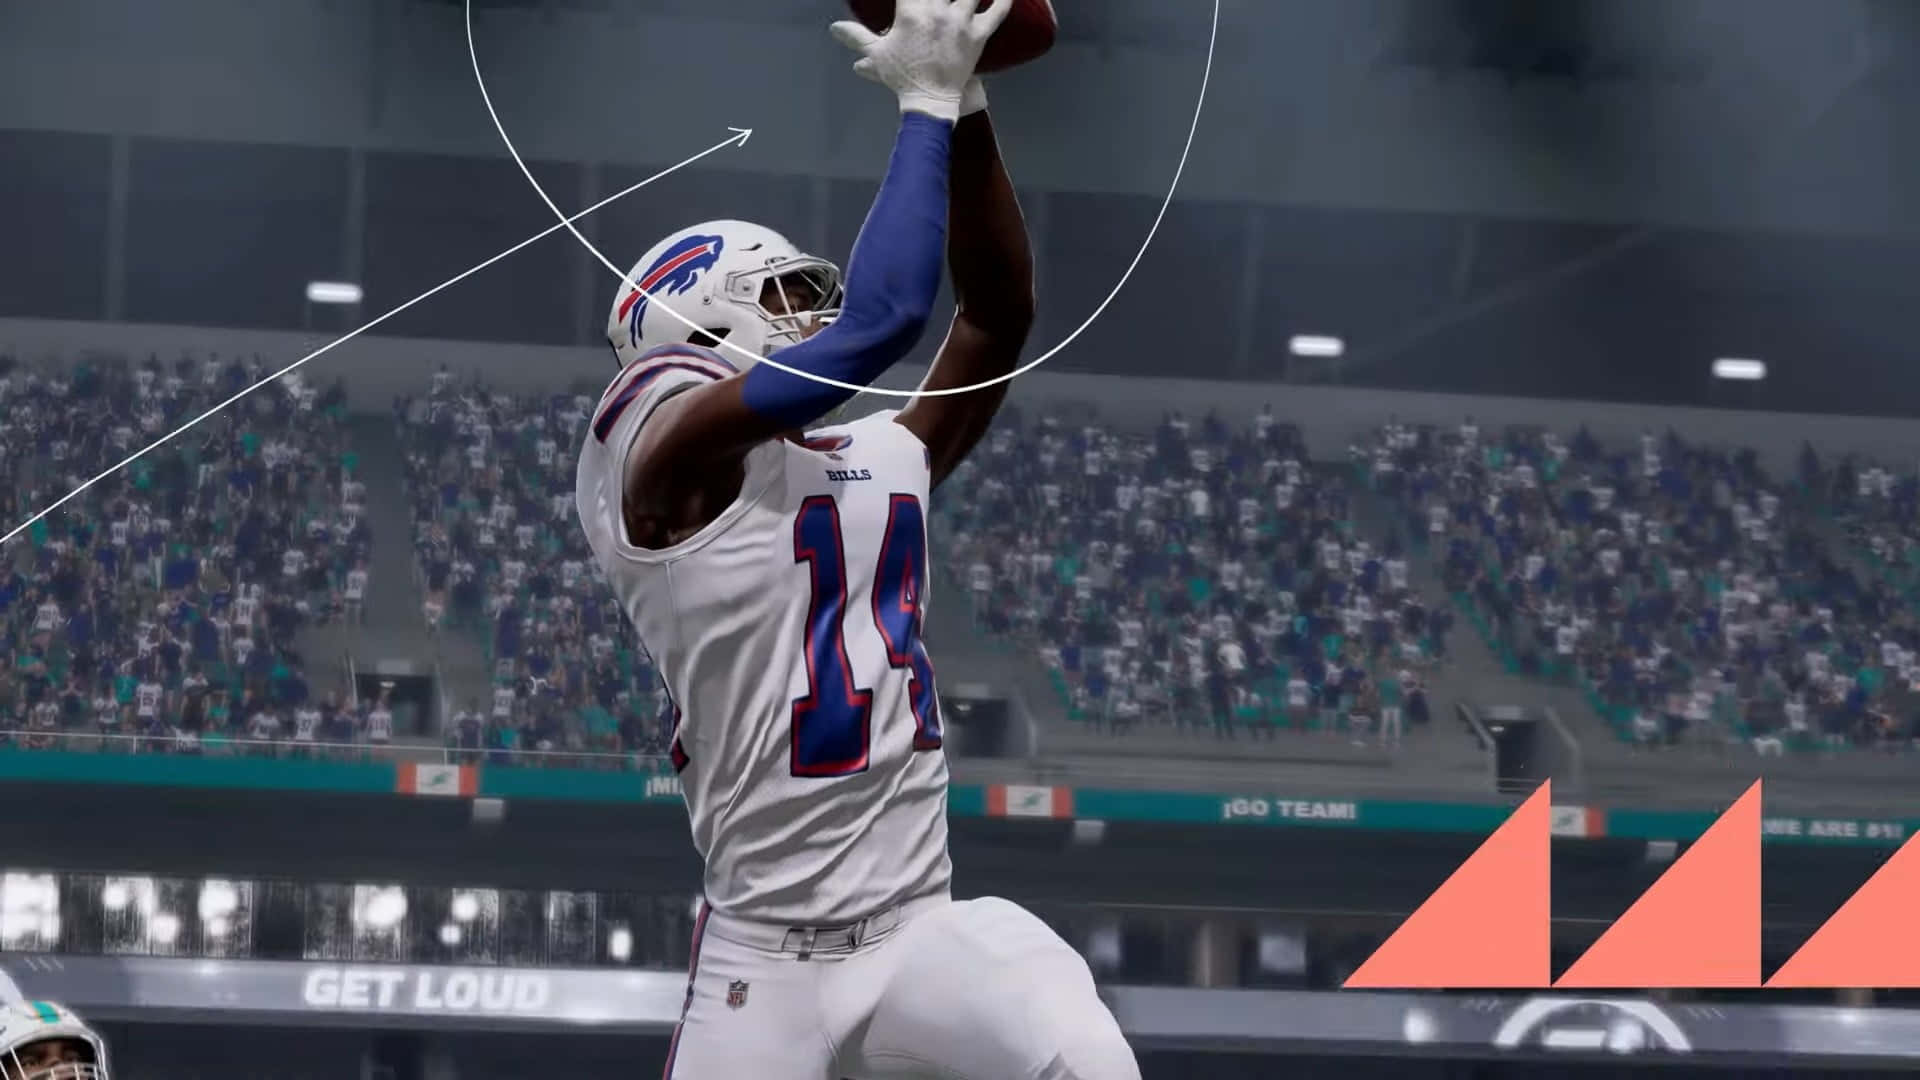 Experience the action-packed gameplay of Madden NFL 22! Wallpaper